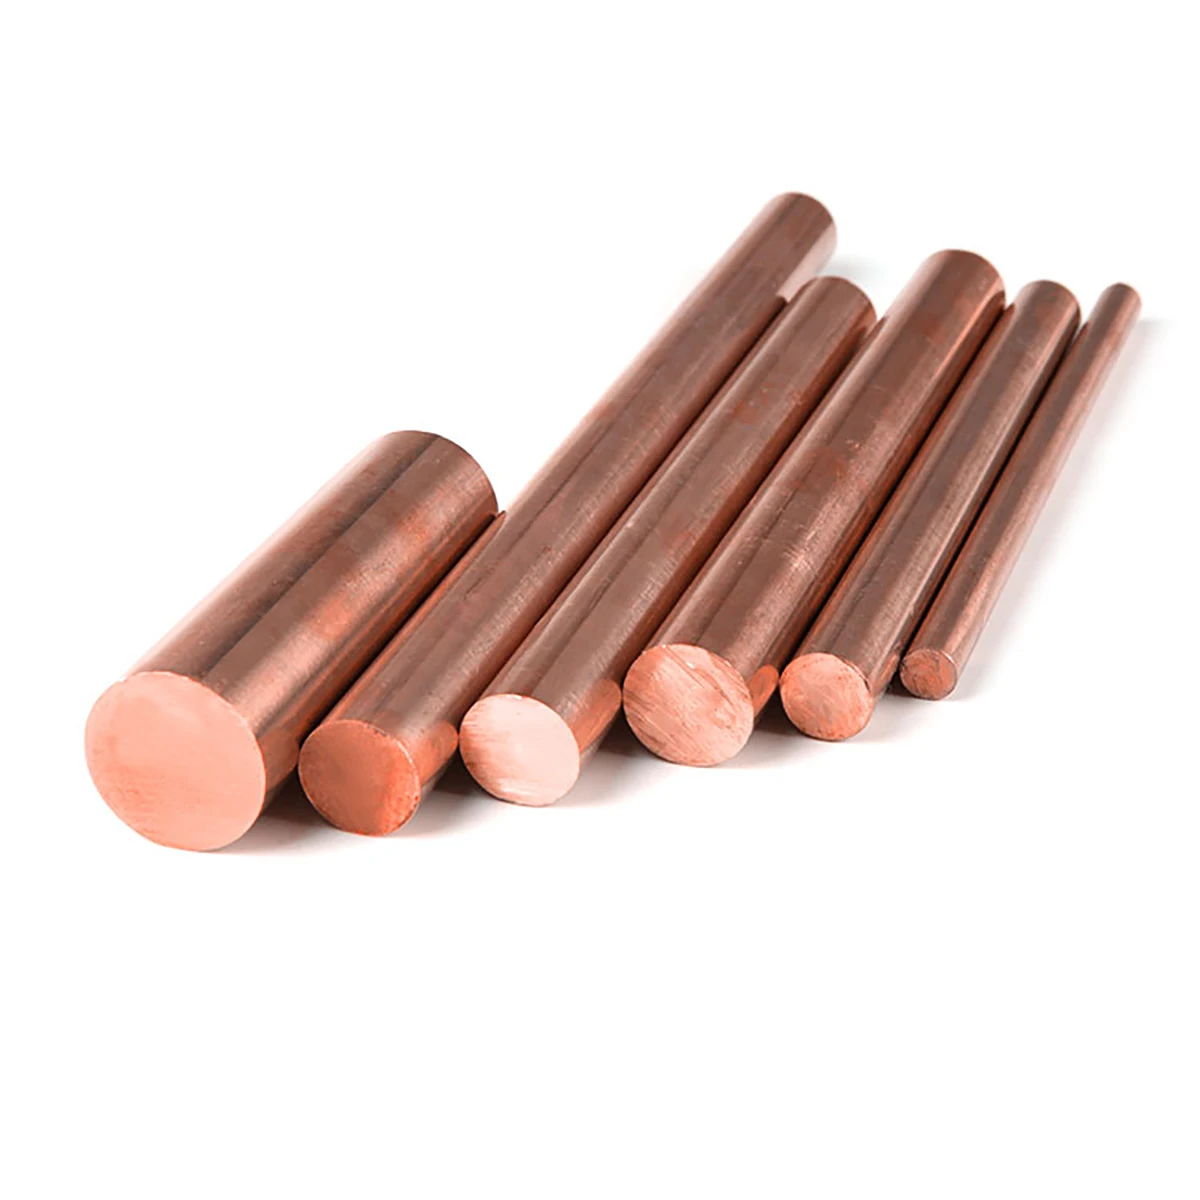 Diameter 6mm T2 Red Copper Round Bar Rod Pure Copper Stick Length 650mm for Milling Welding Metalworking enlarge